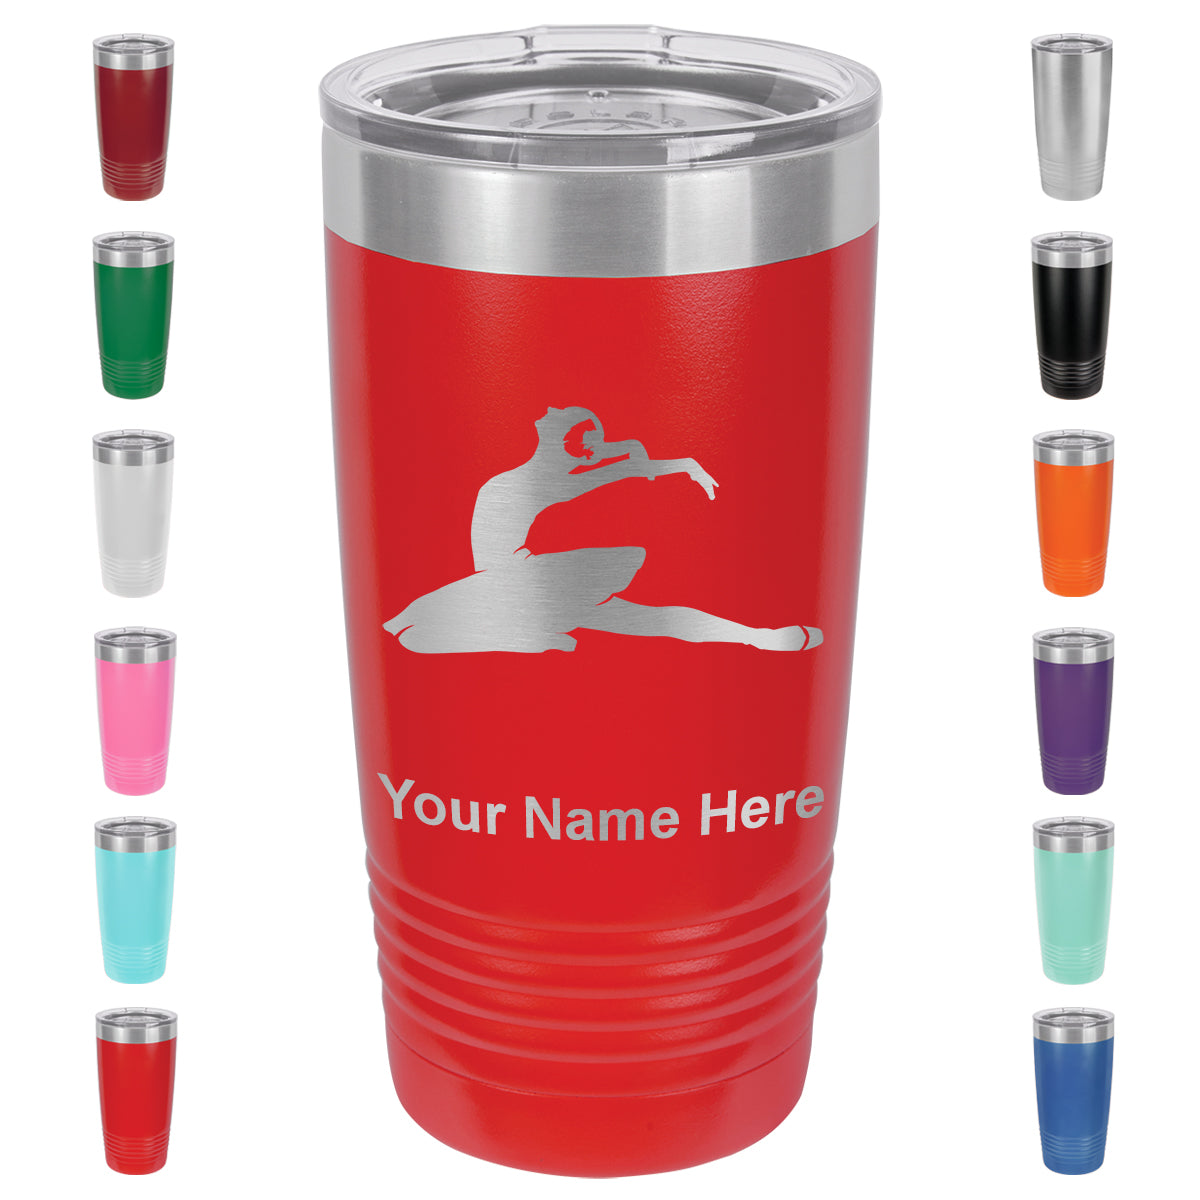 20oz Vacuum Insulated Tumbler Mug, Dancer, Personalized Engraving Included